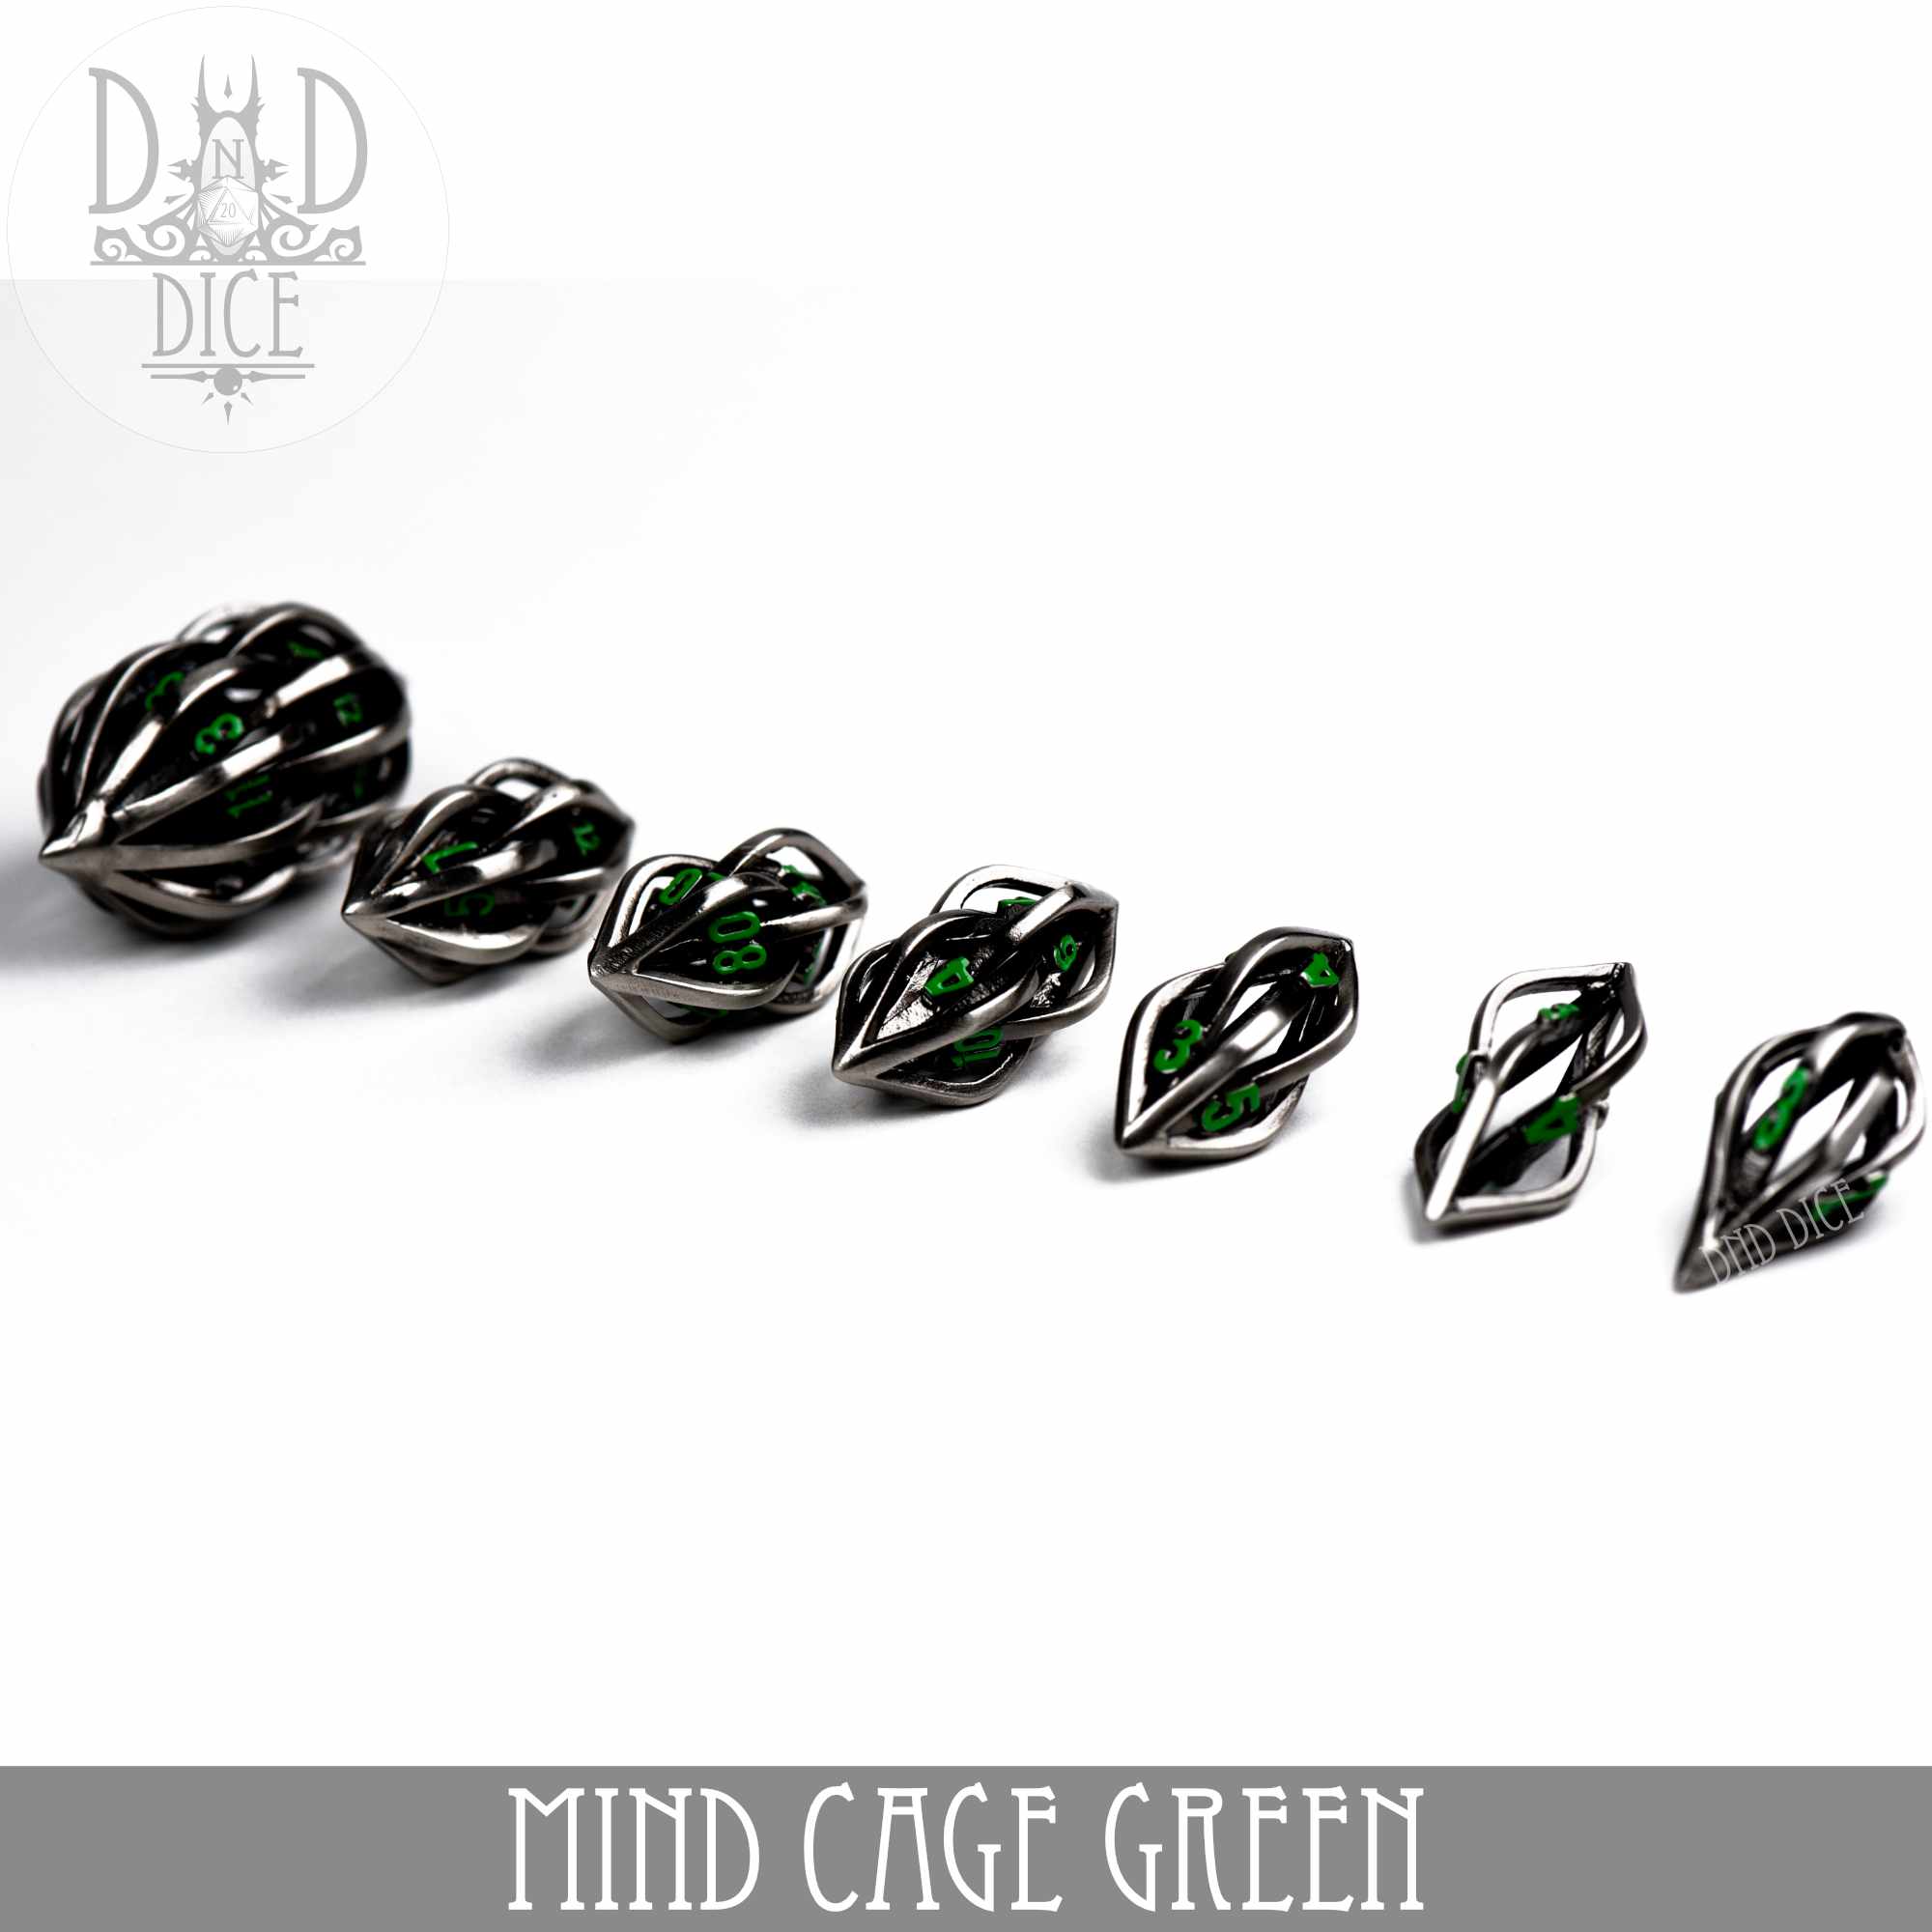 Mind Cage Green Hollow Metal Dice Set (Gift Box)